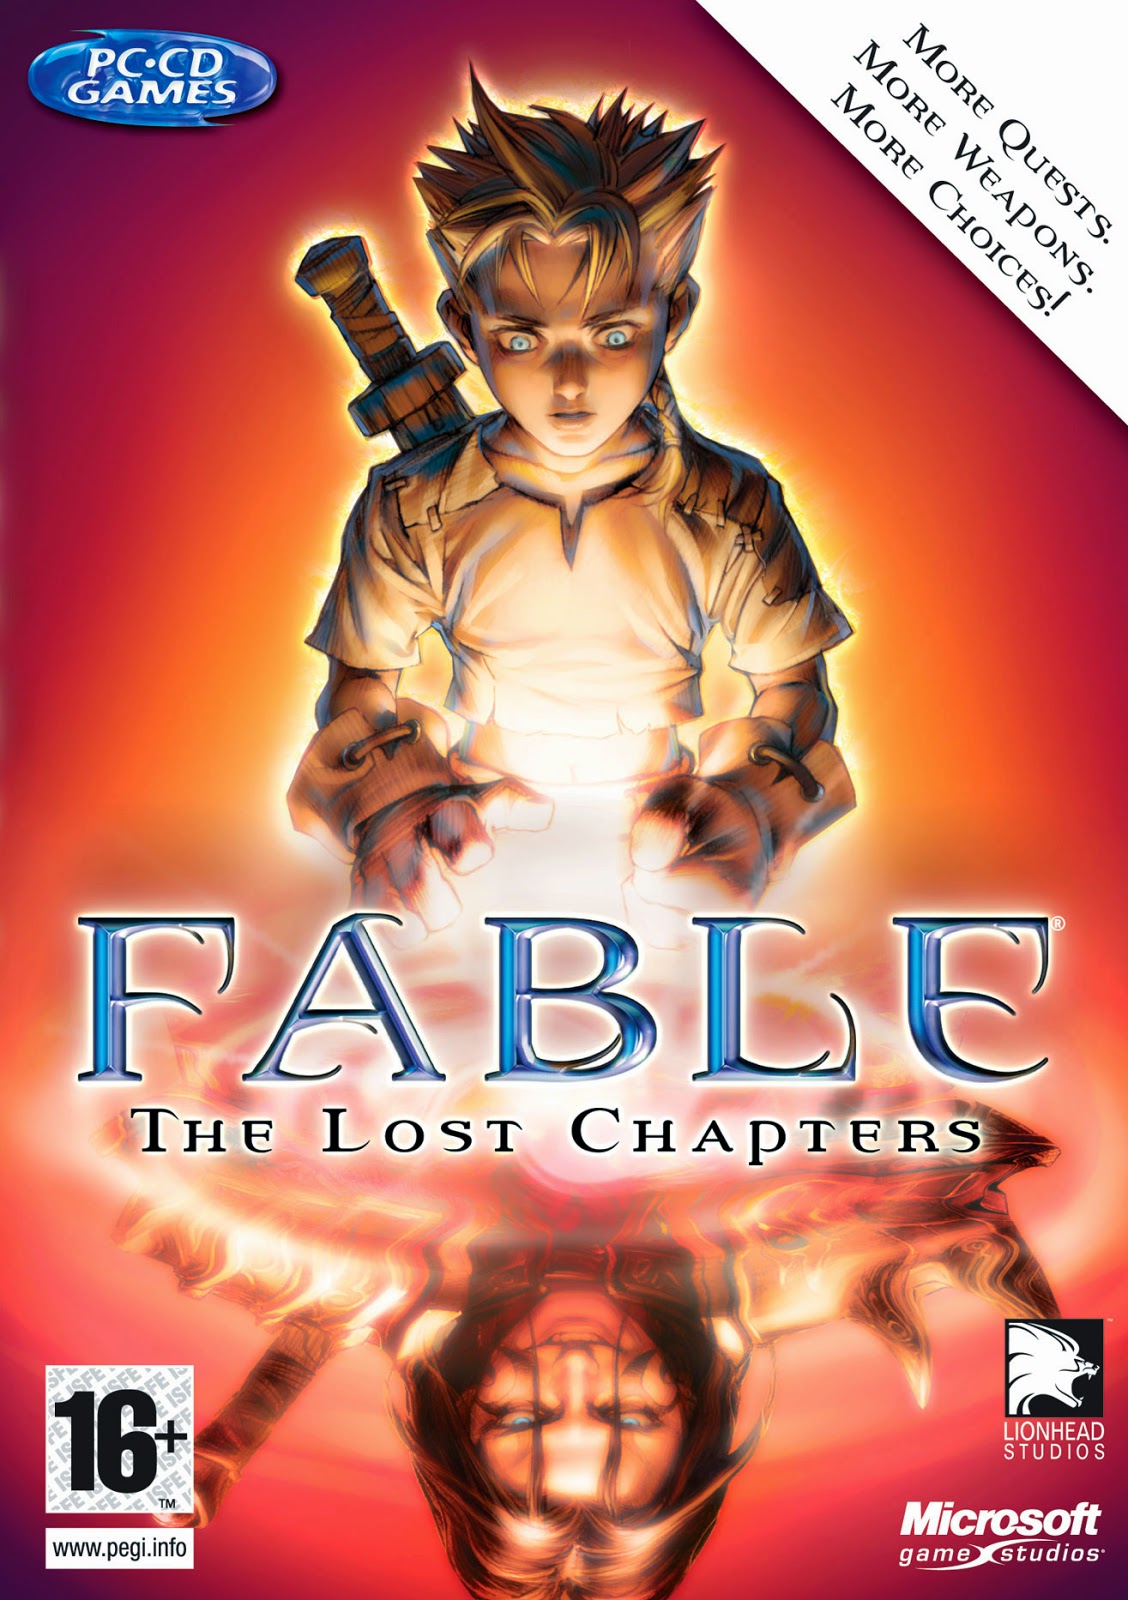 Fable: The Lost Chapters PC game crack Download